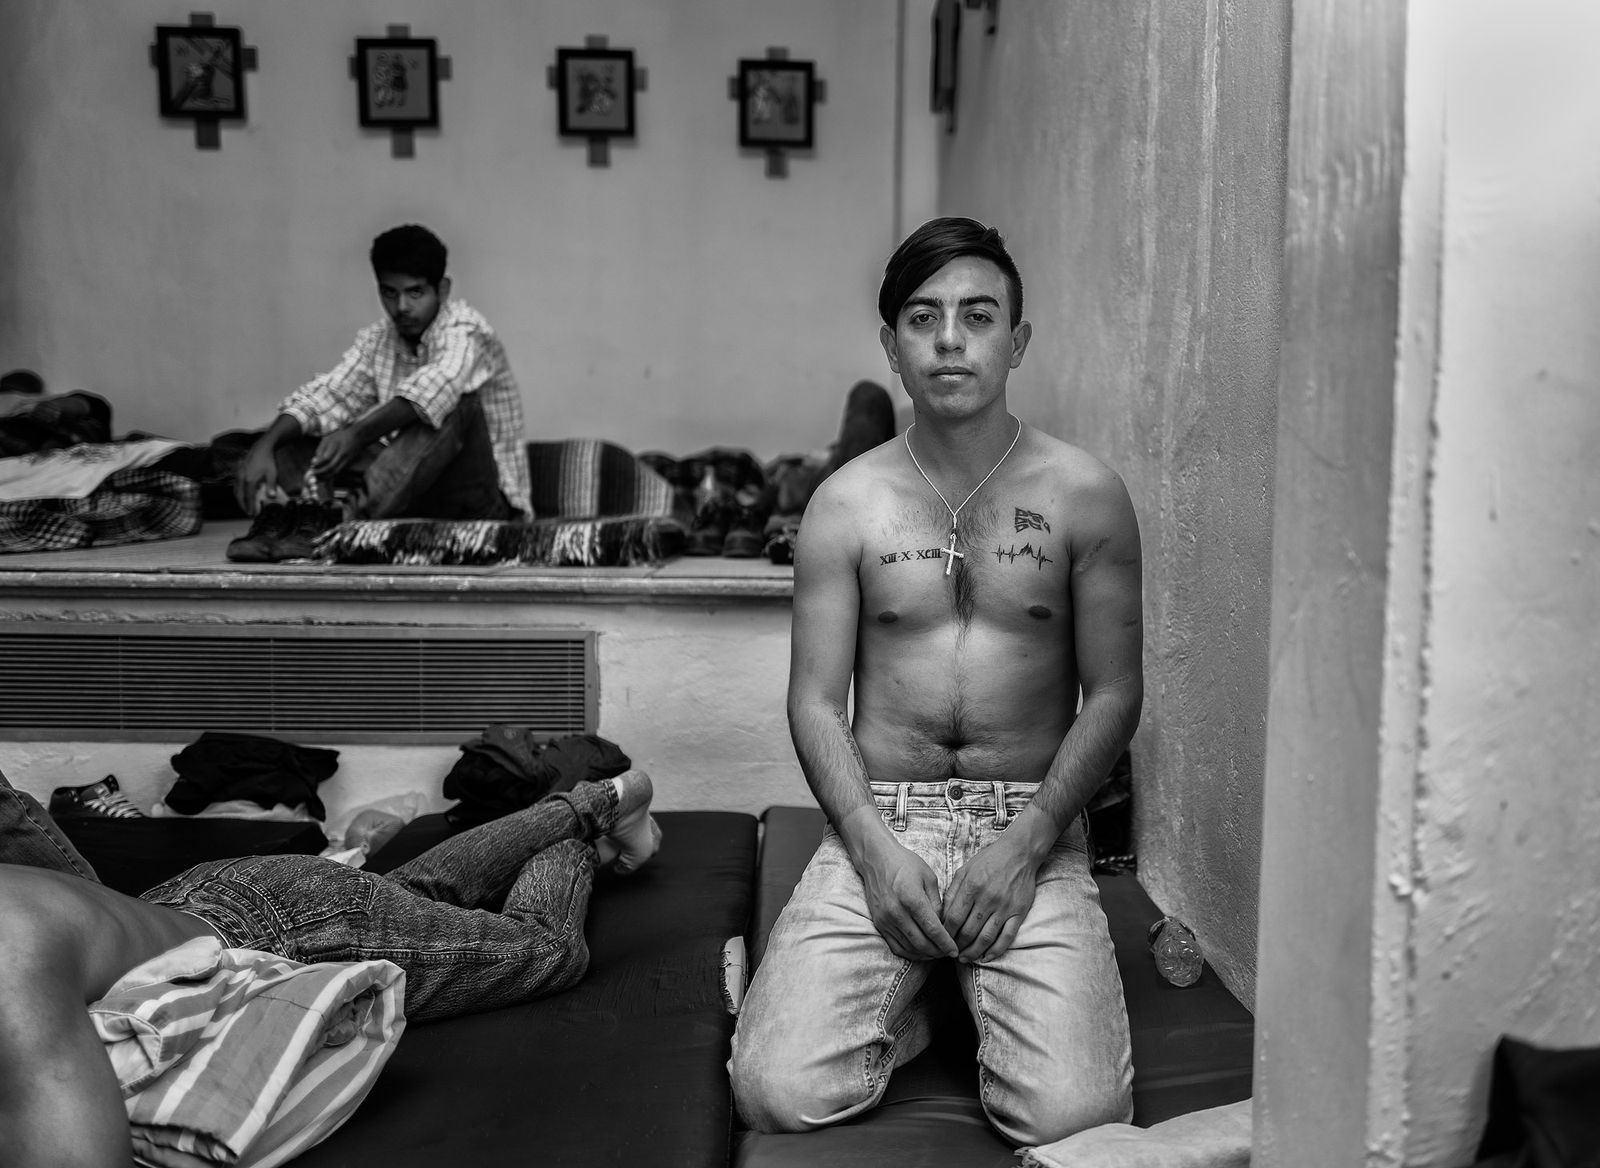 © Ada Trillo - Image from the If Walls Could Speak: Asylum seekers forced to wait in Mexico. photography project